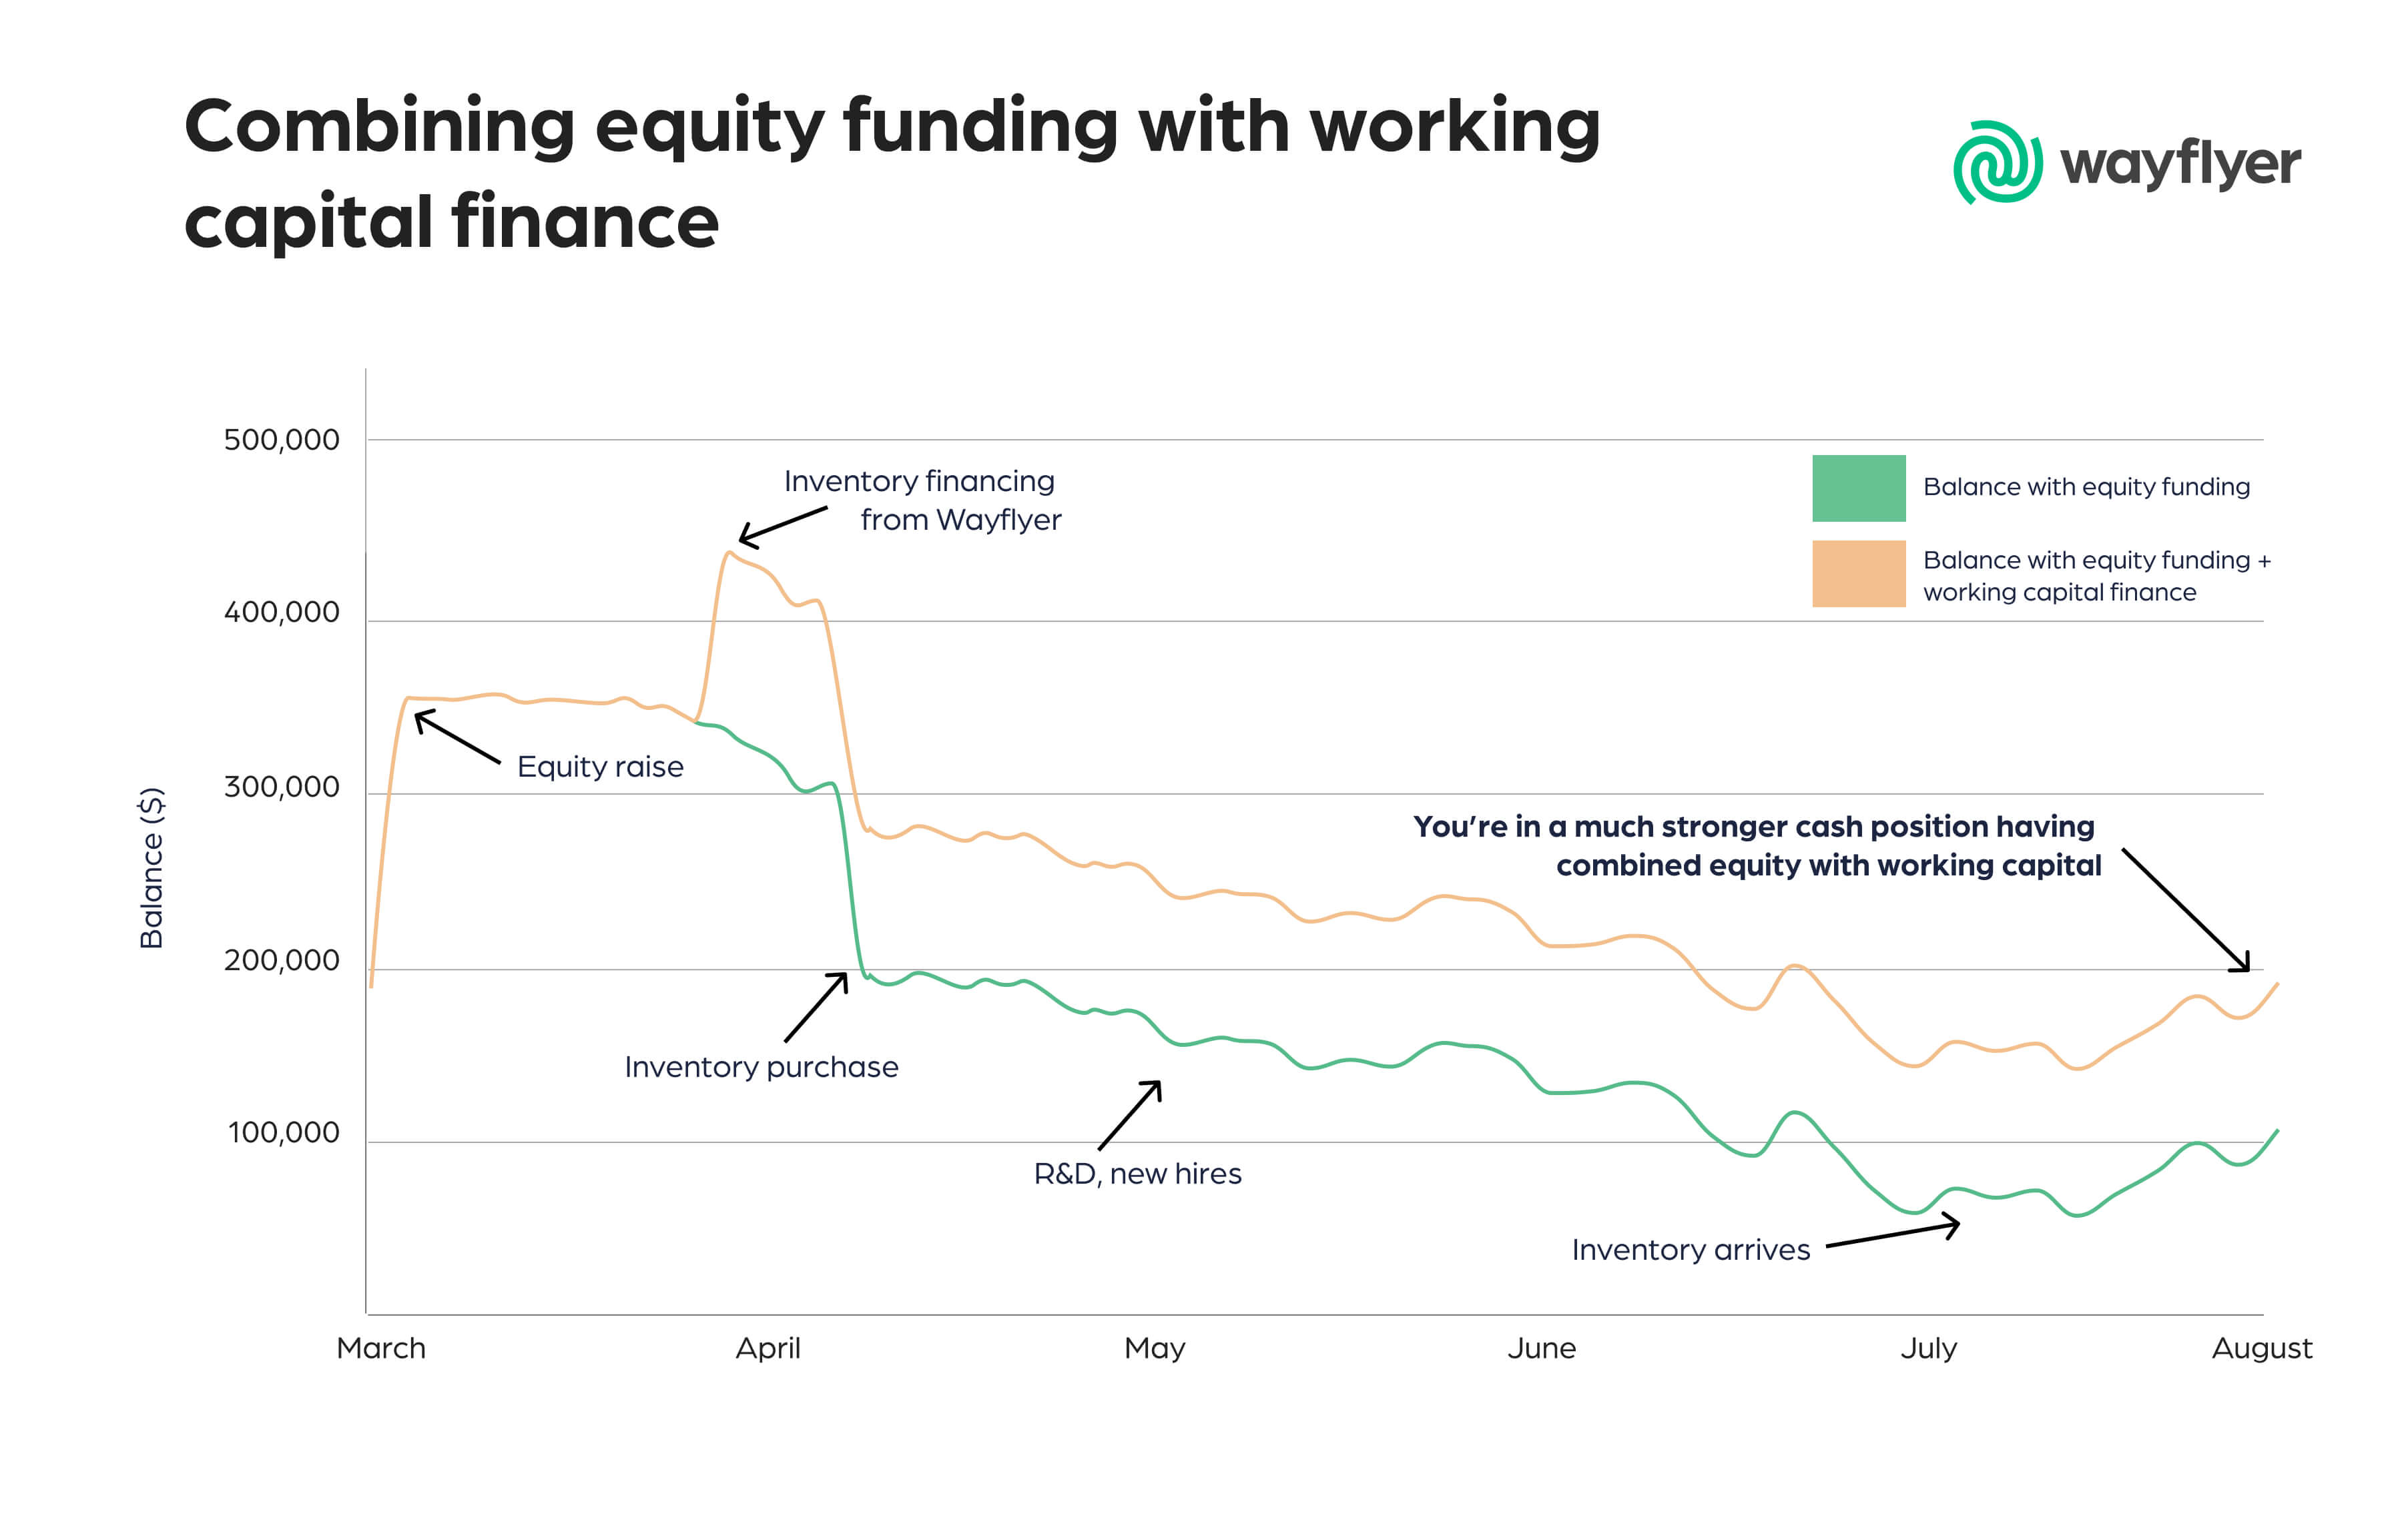 Combining equity funding with working capital finance